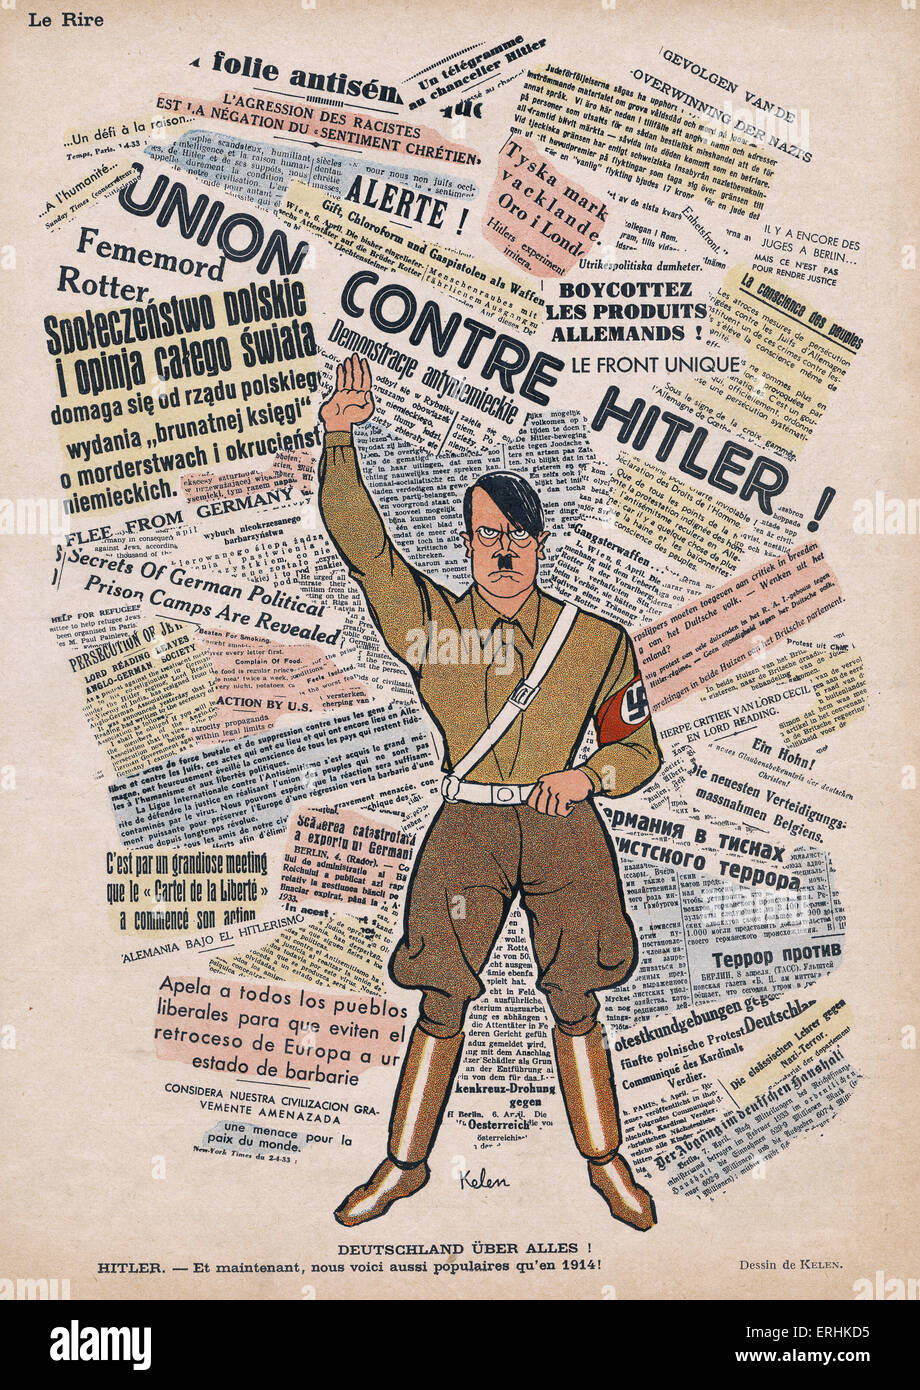 Anti-Hitler cartoon on the back page of Le Rire 29th April, 1933. Caption reads 'Deutschland Uber Alles; Hitler- et maintenant, Stock Photo